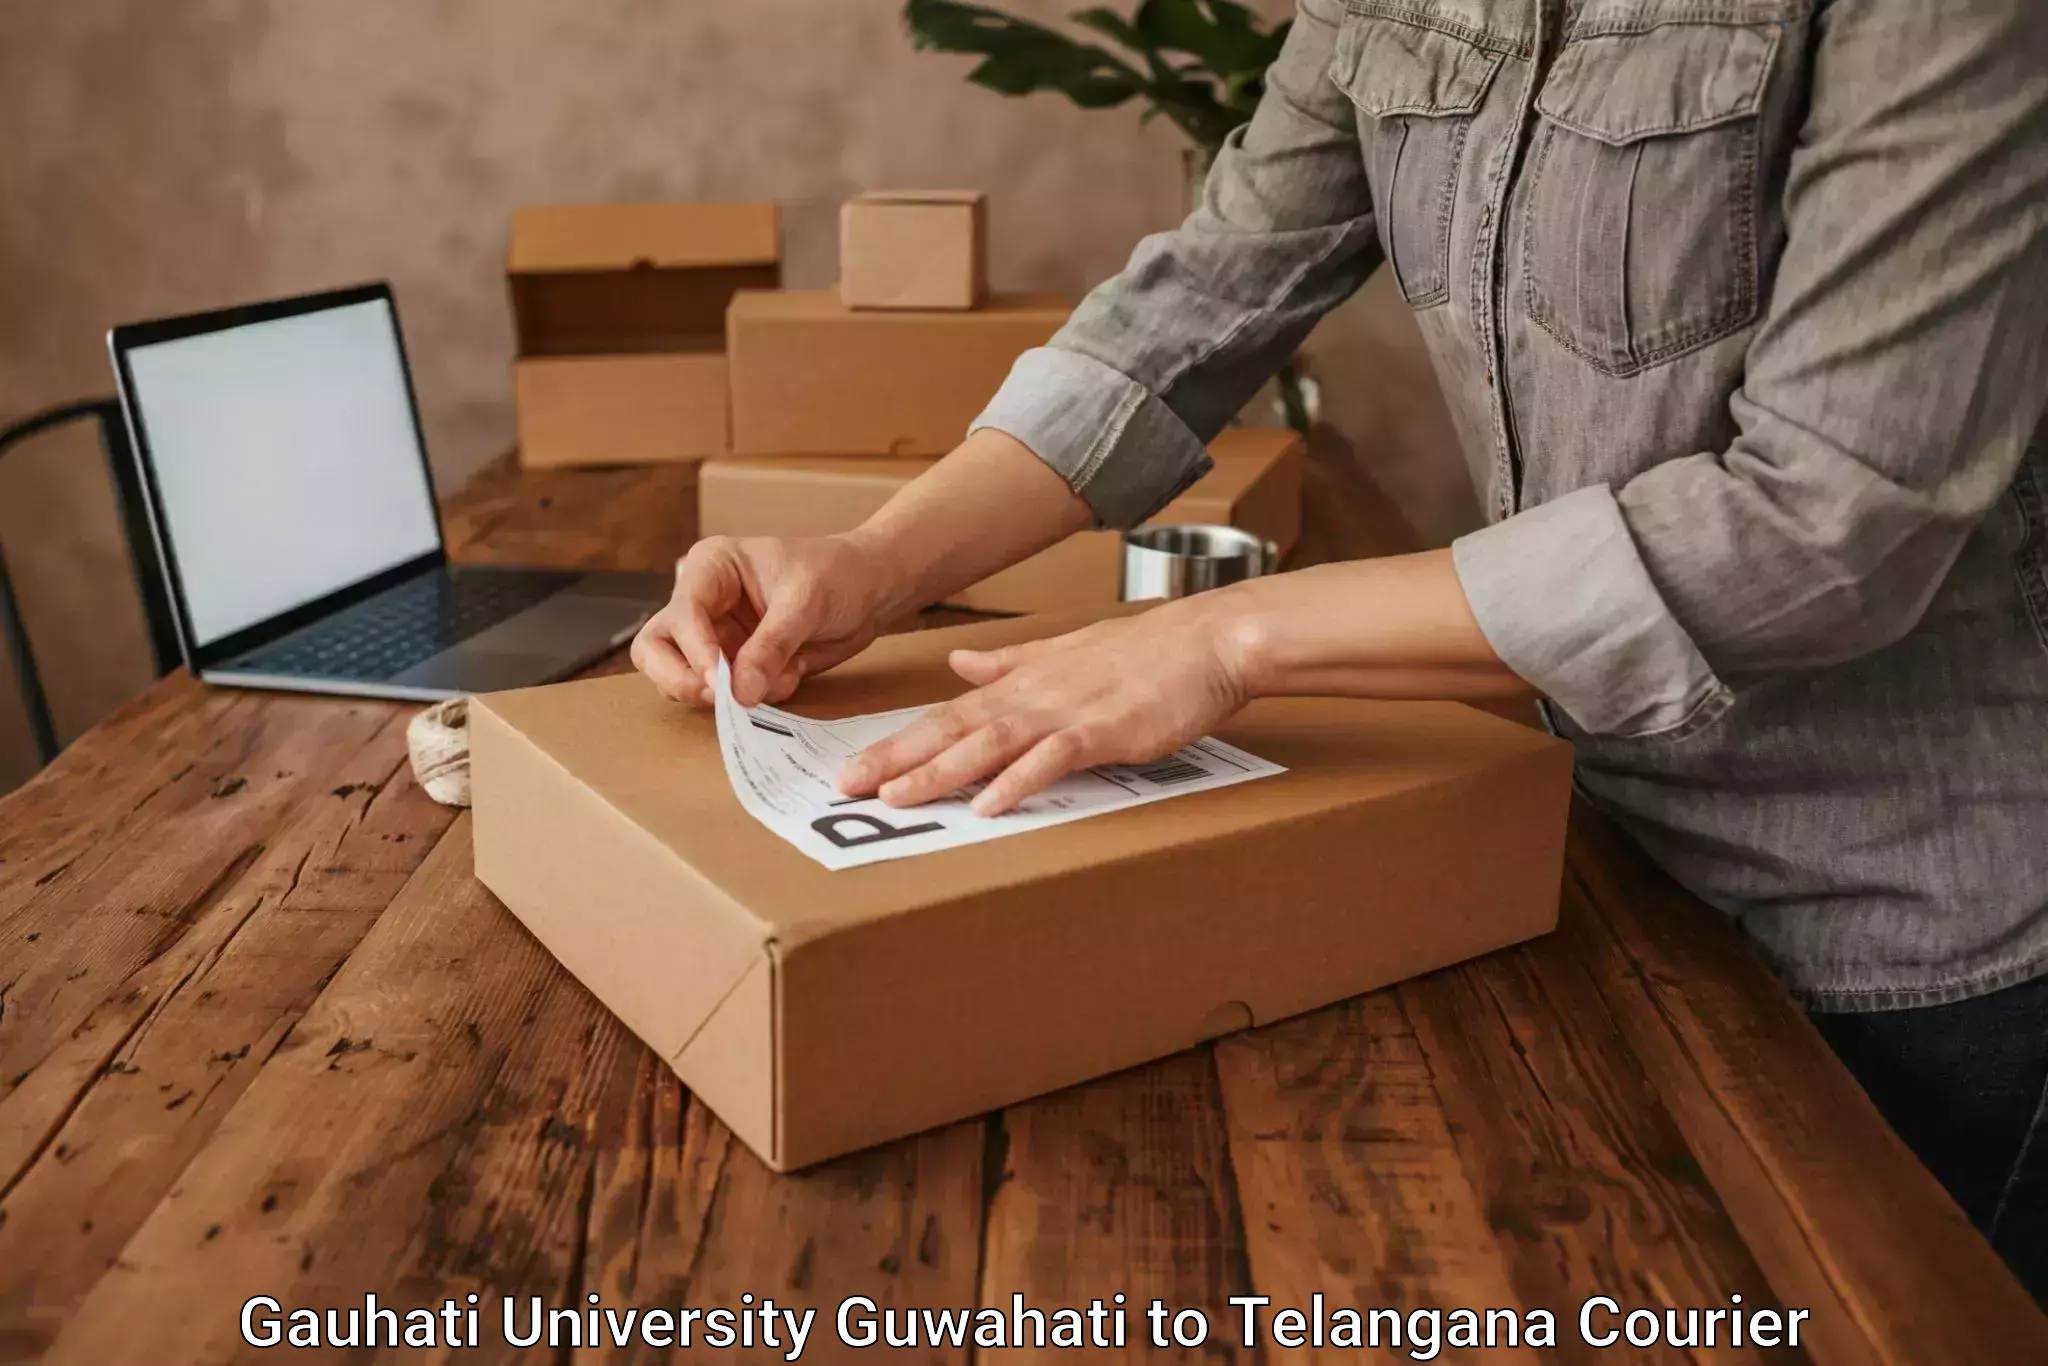 Medical delivery services in Gauhati University Guwahati to Vemulawada